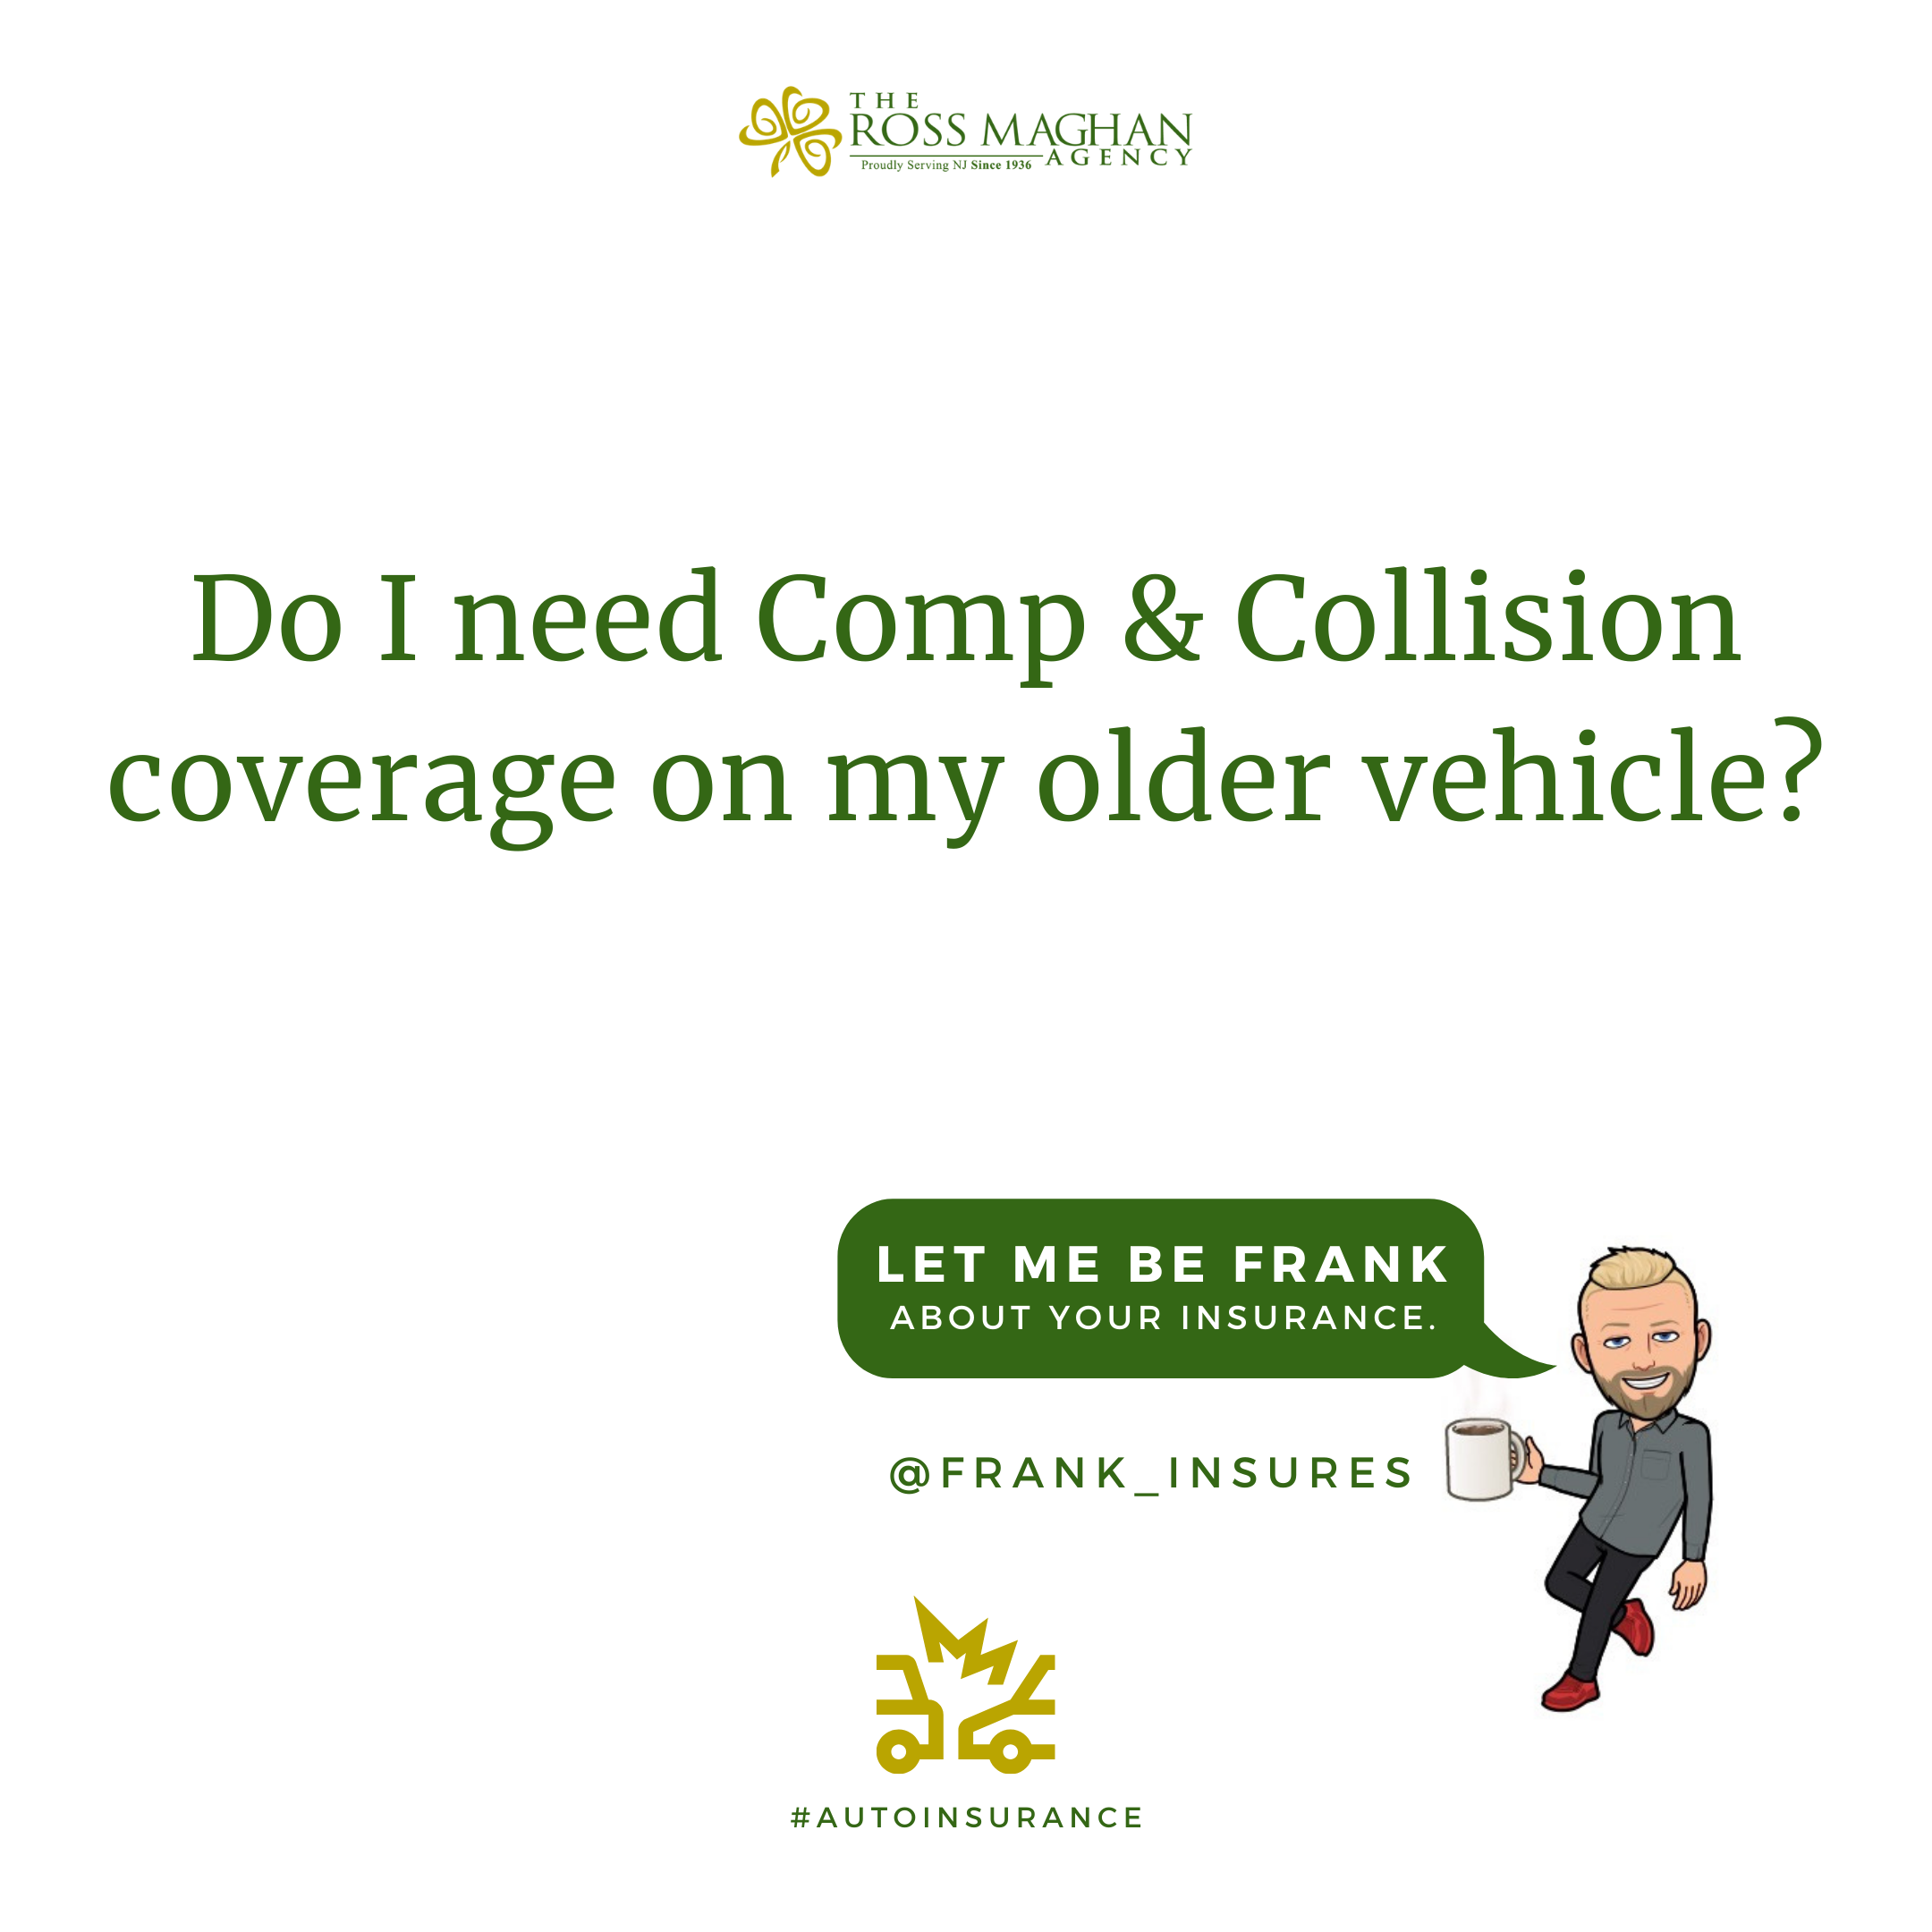 Featured image for “Do I need Comp & Collision coverage on my older vehicle?”